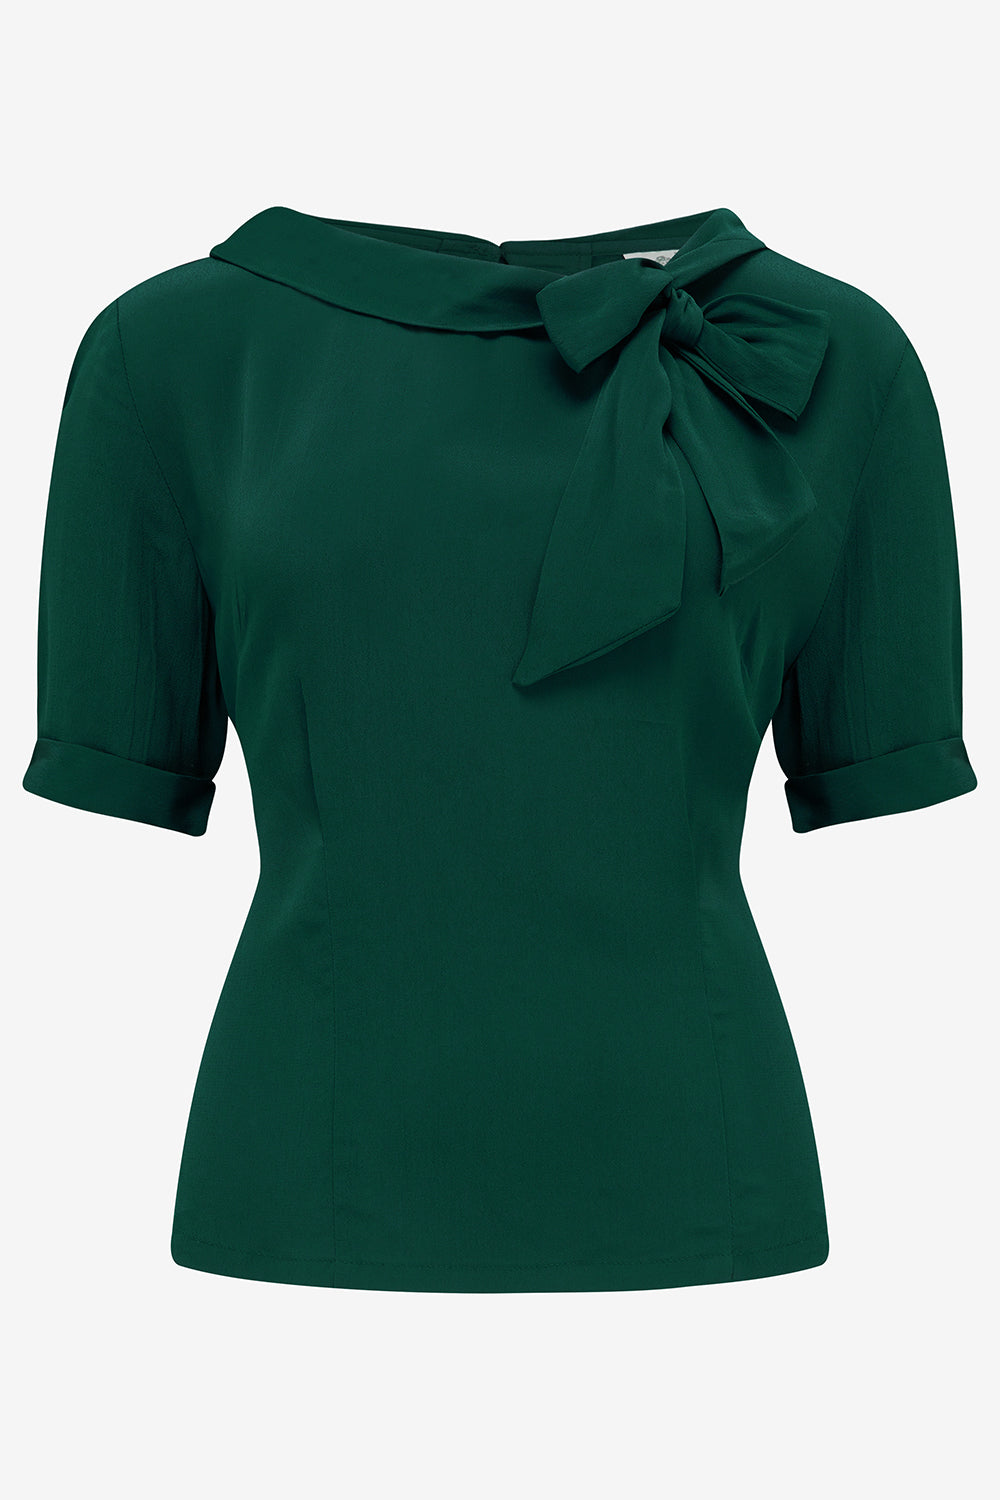 Cindy Blouse In Green , Classic 1940s Vintage Inspired Style - True and authentic vintage style clothing, inspired by the Classic styles of CC41 , WW2 and the fun 1950s RocknRoll era, for everyday wear plus events like Goodwood Revival, Twinwood Festival and Viva Las Vegas Rockabilly Weekend Rock n Romance The Seamstress Of Bloomsbury